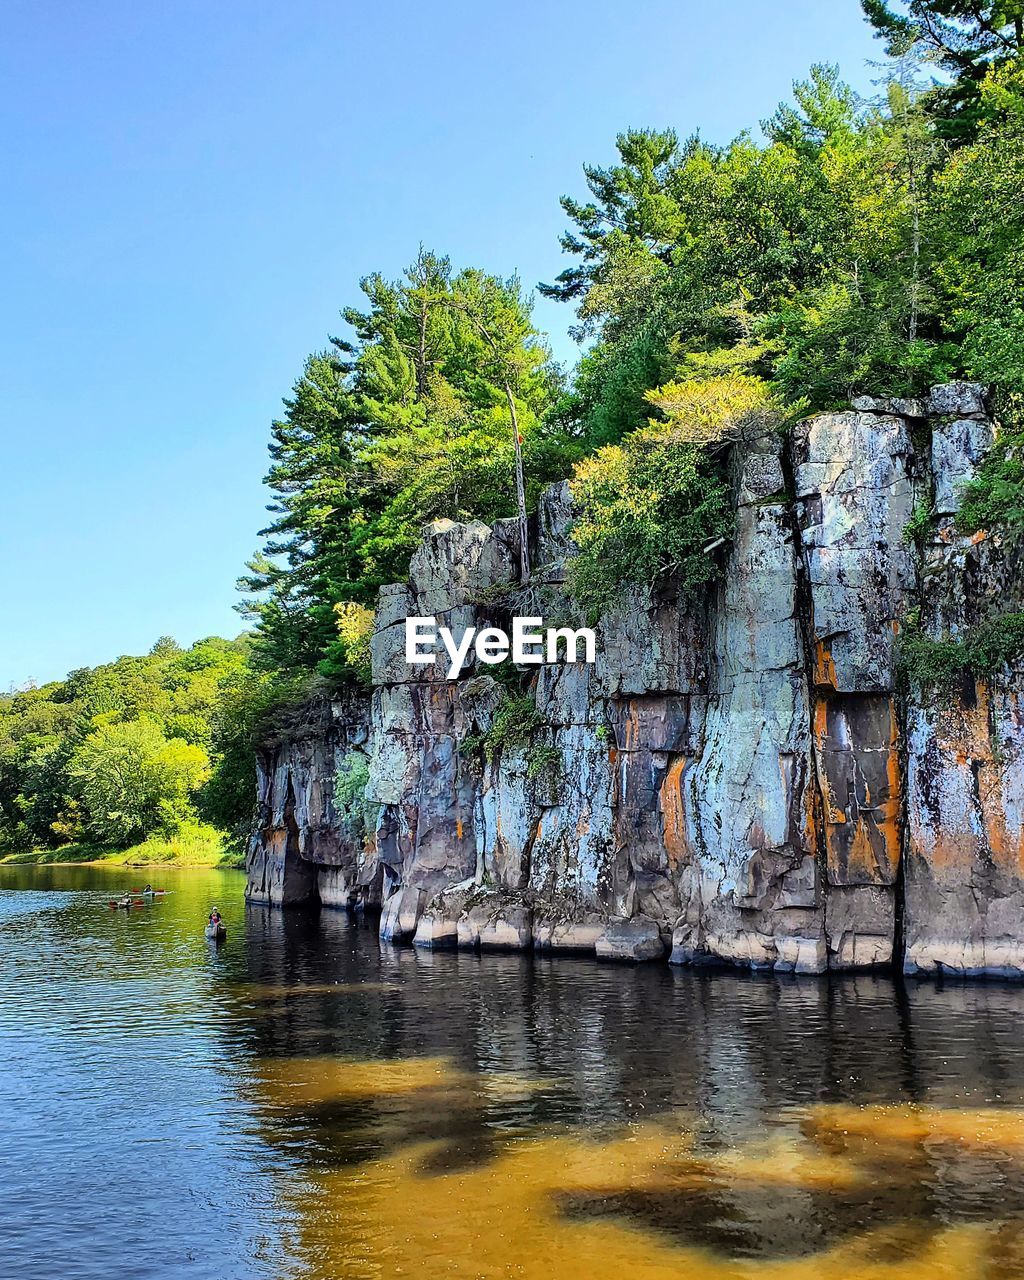 The beautiful bluffs along the st. croix river.